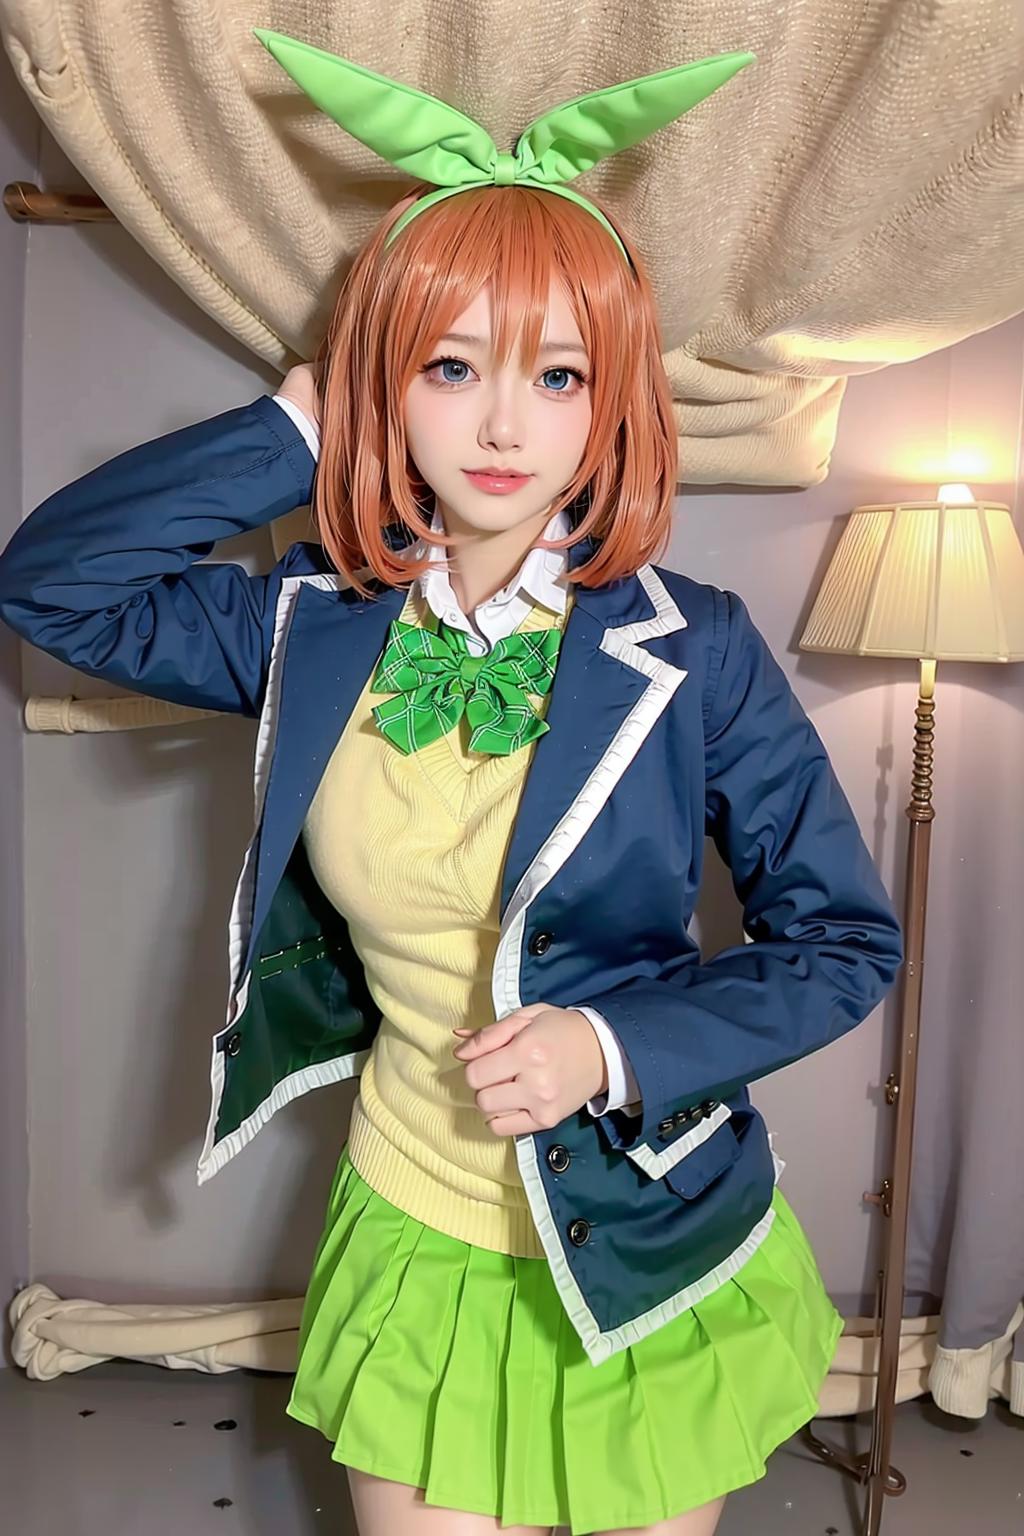 Nakano Yotsuba in The Quintessential Quintuplets | Realistic LORA image by jappww